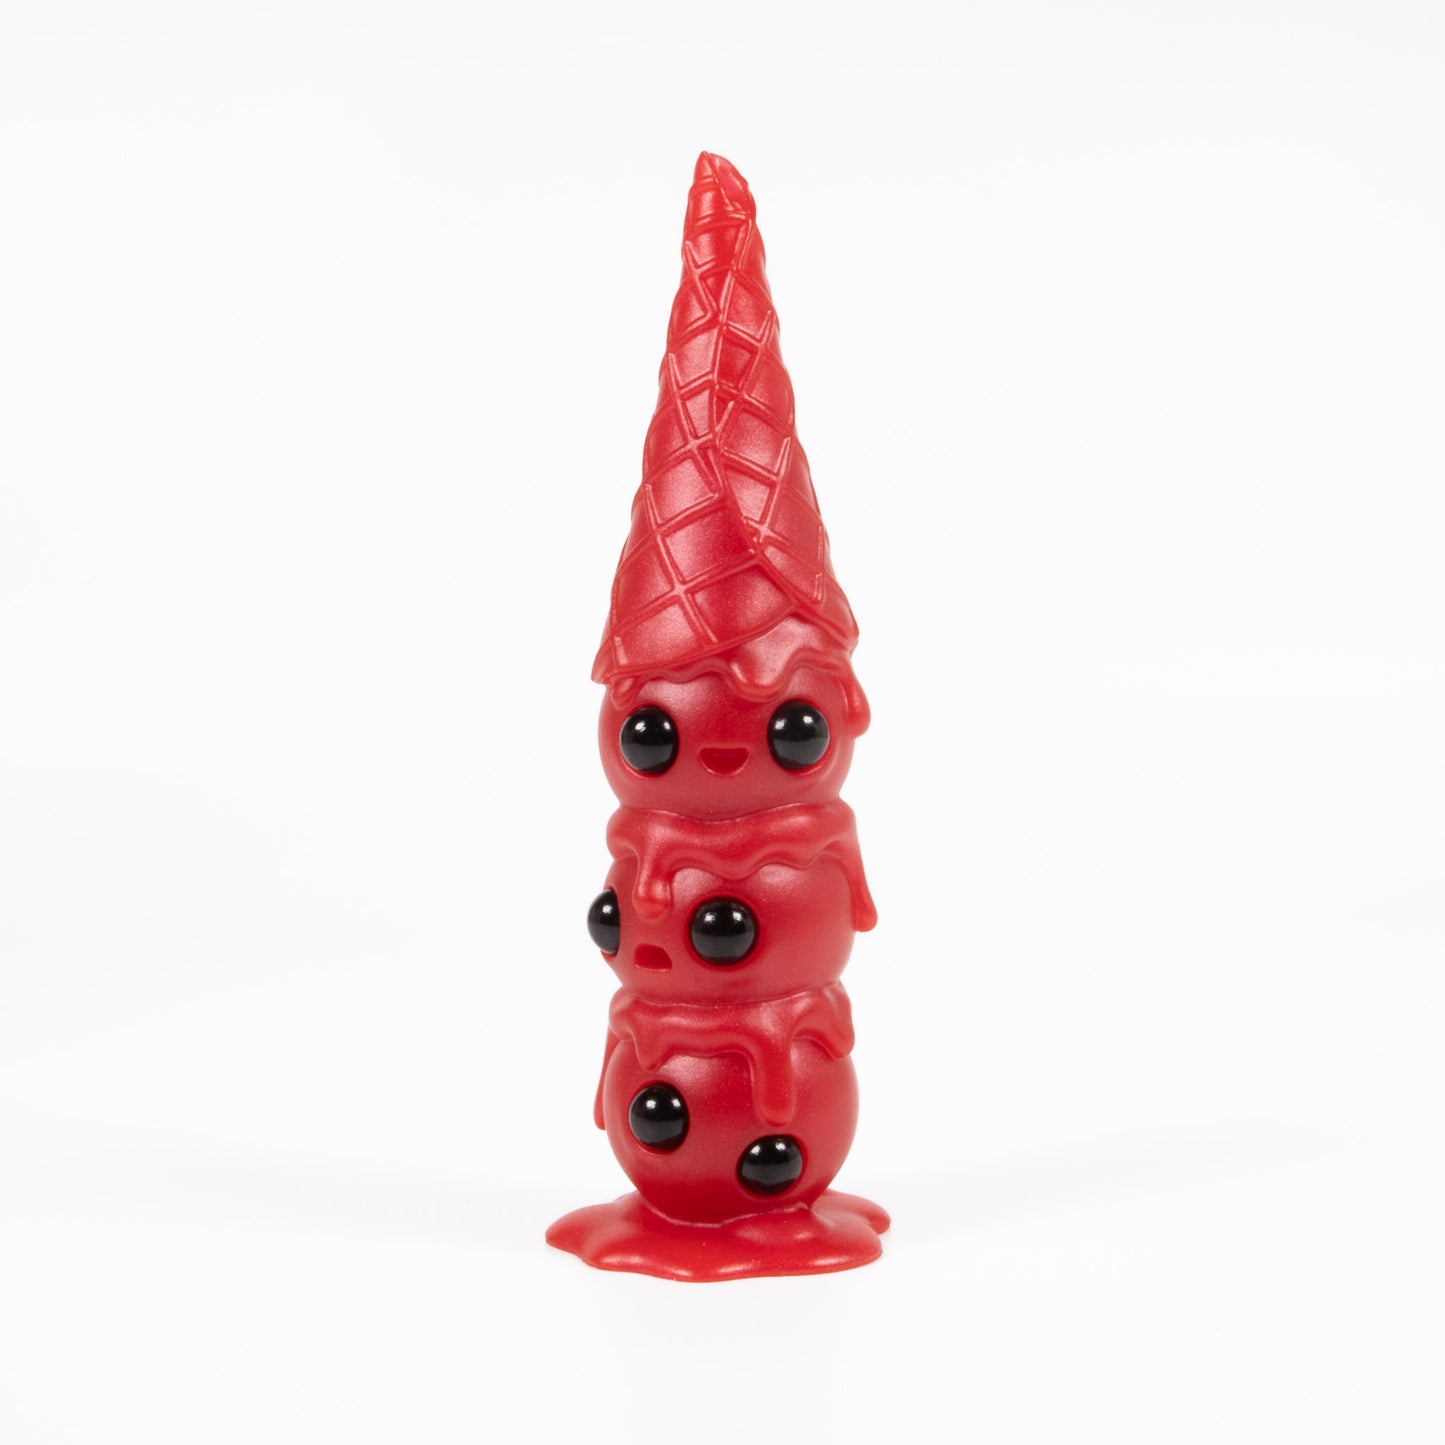 Peppermint Heat - This is Wafull 3.75" Resin Figure